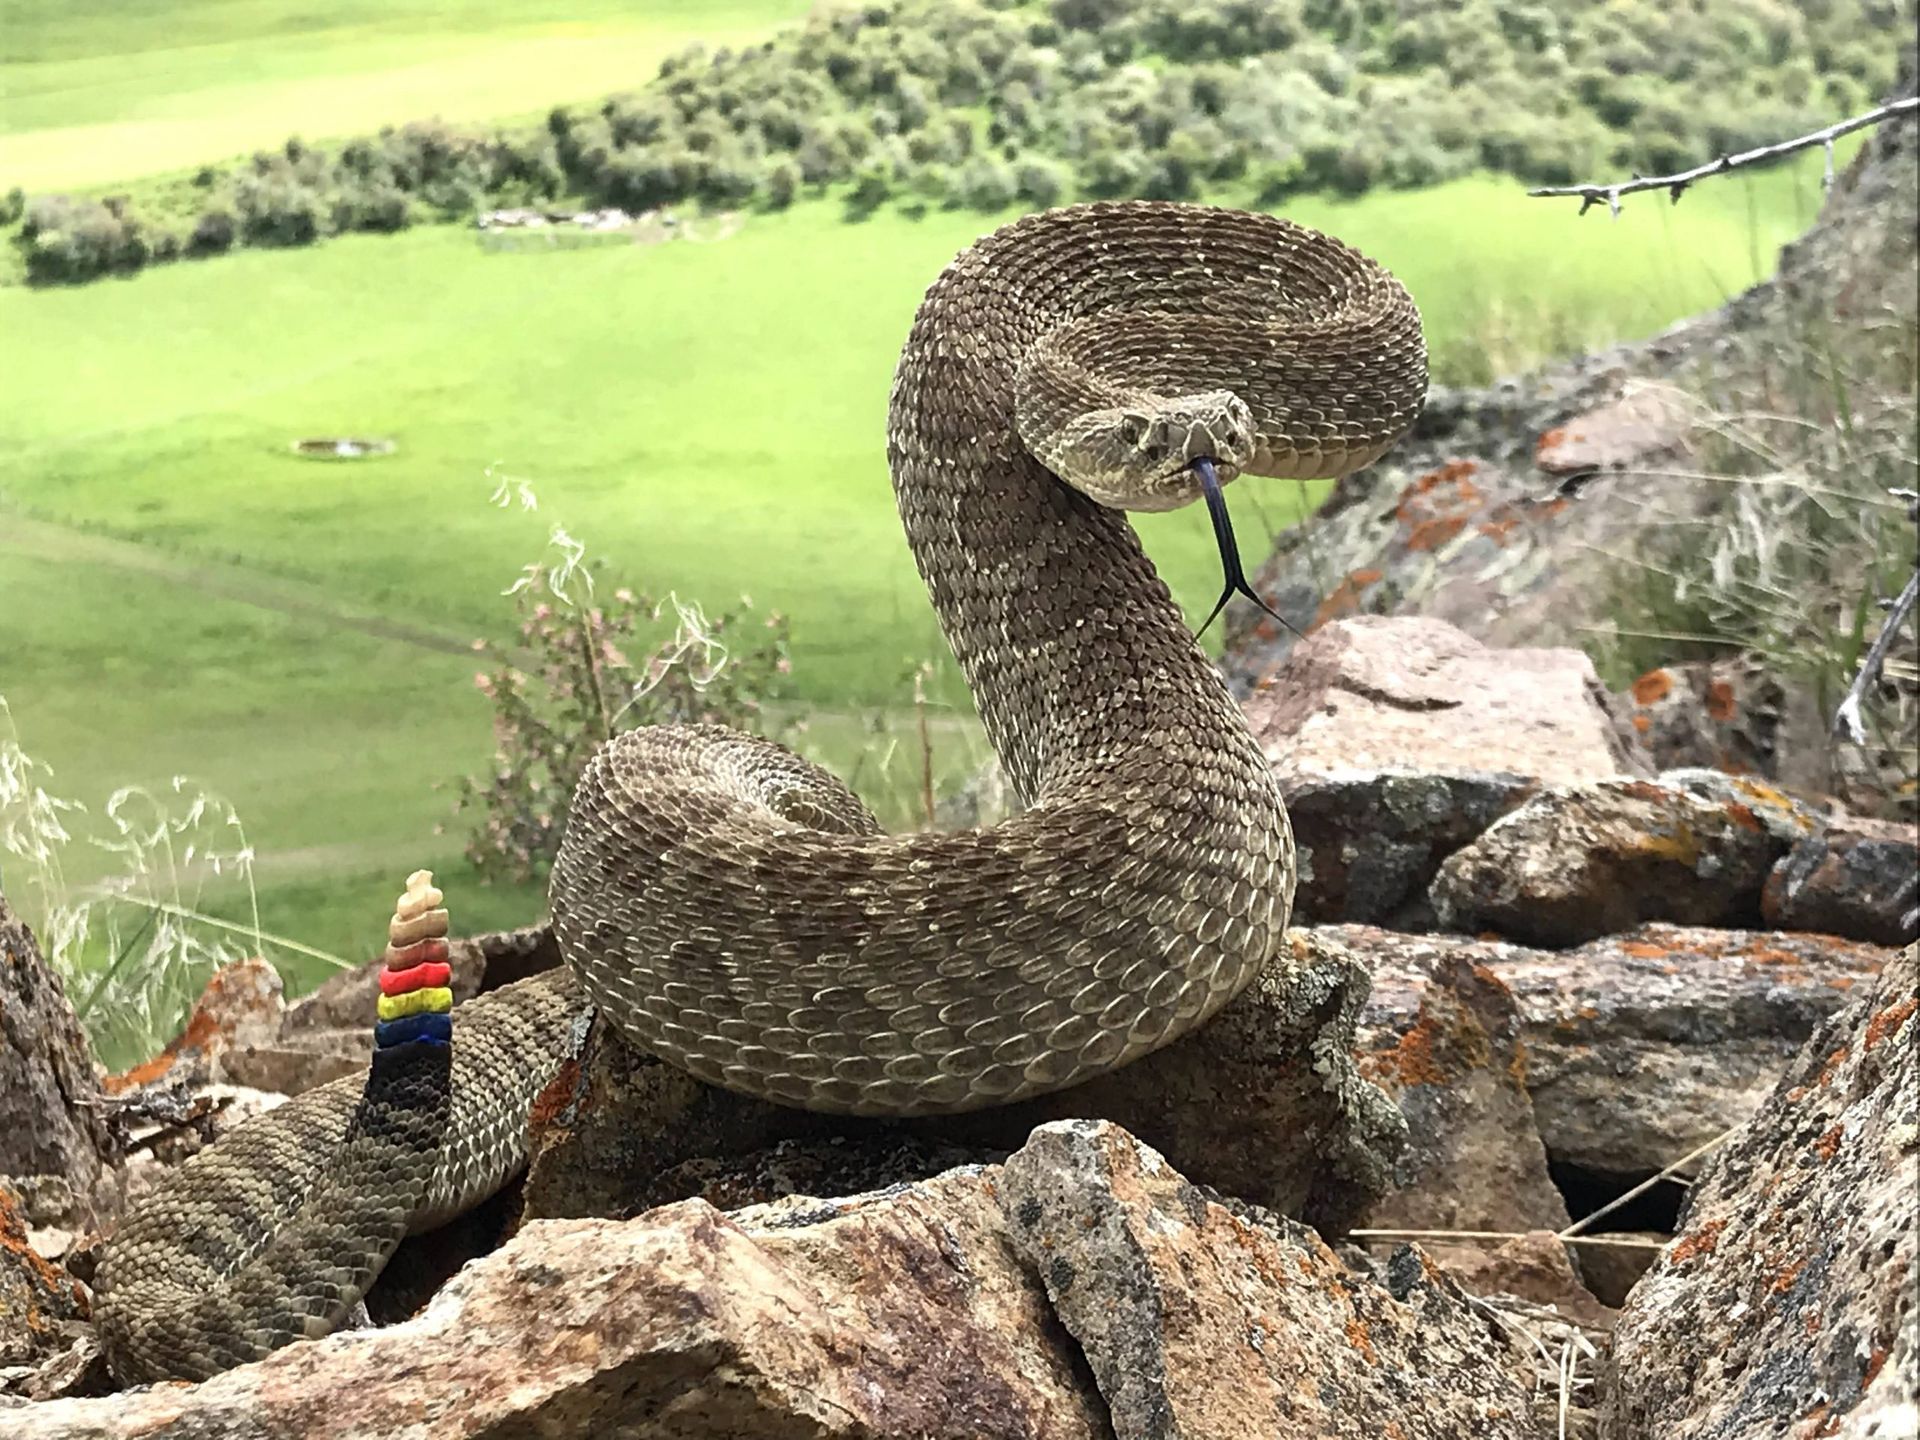 A rattlesnake is sitting on a rock with a golf course in the background.